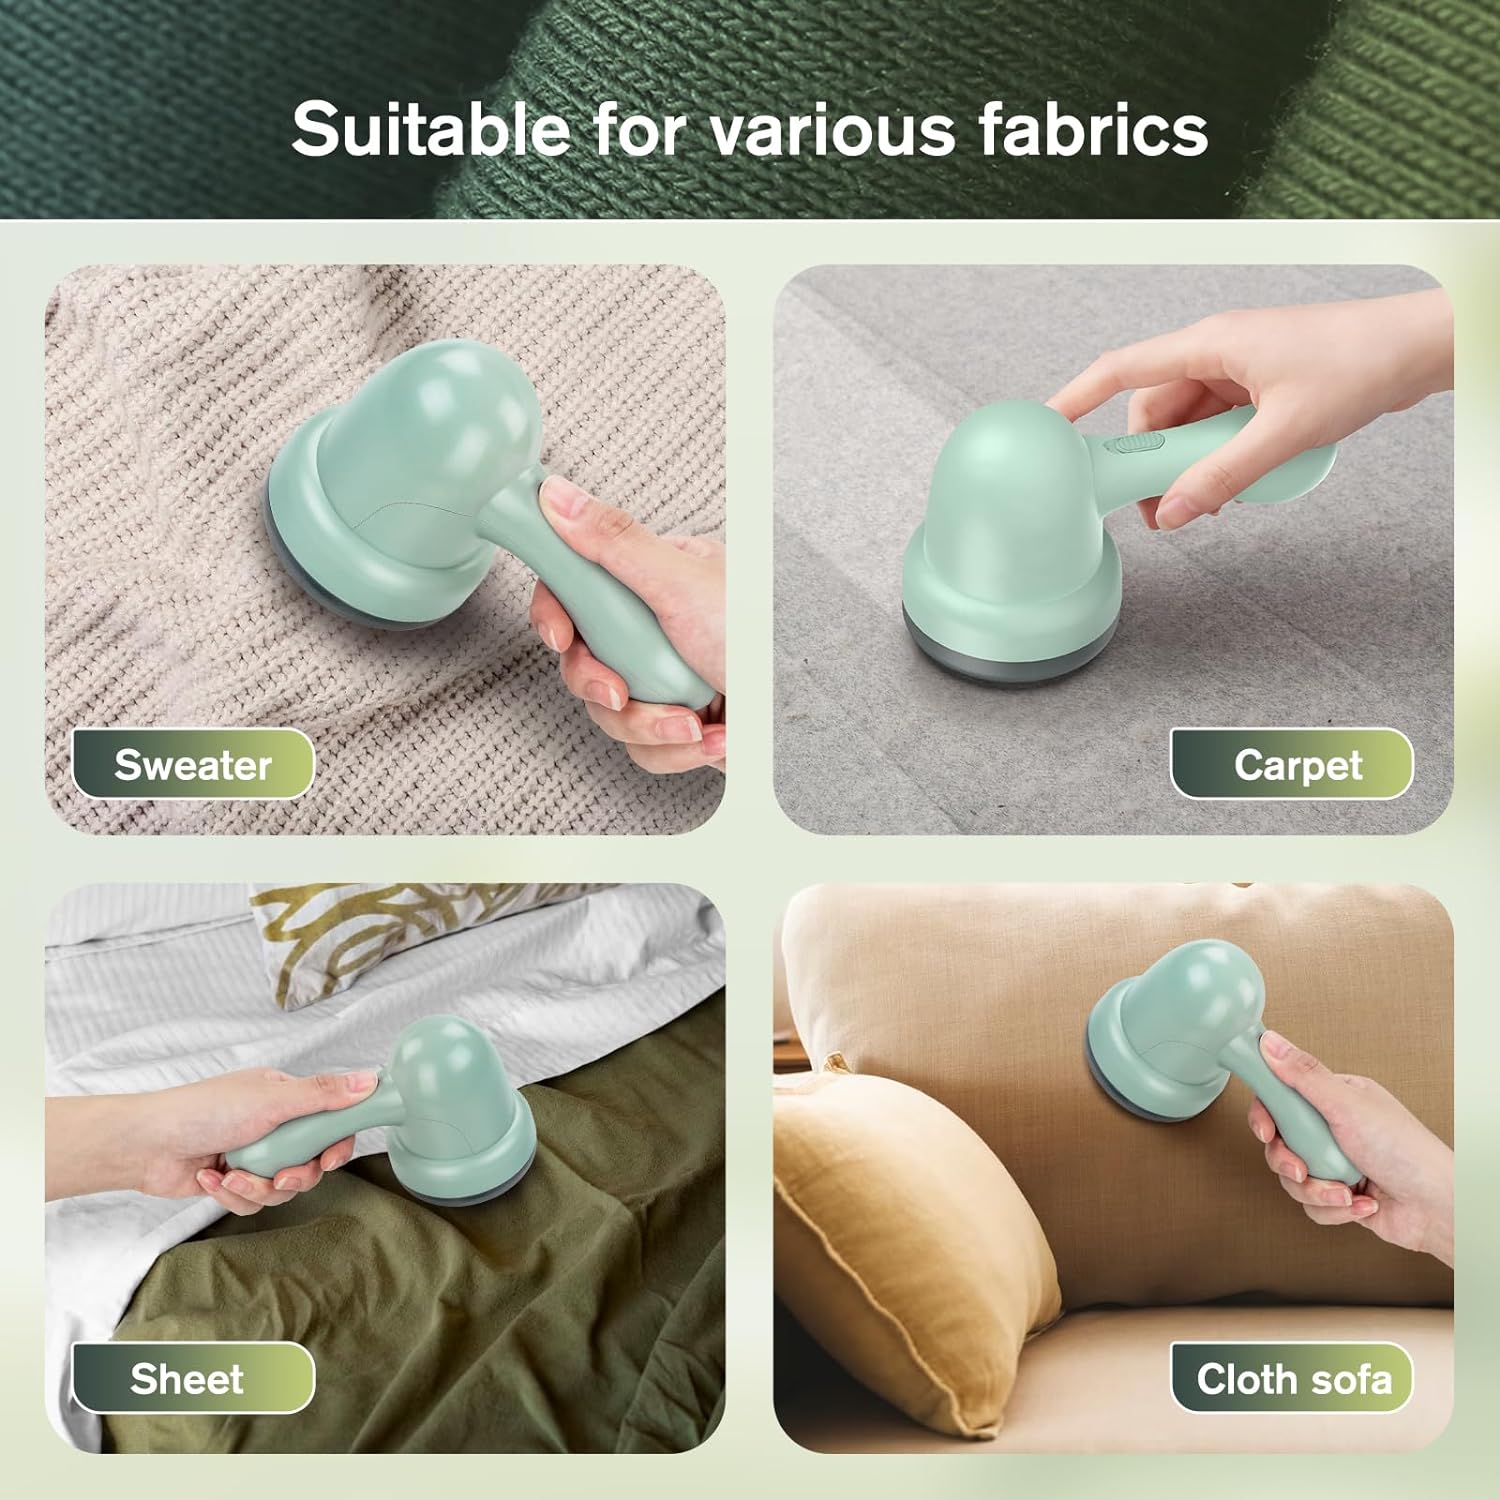 Fabric Shaver, Lint Remover,Battery Operated Portable Fabric Shaver, Lint Shaver Defuzzer Sweater Shaver for Clothes and Furniture AC Adapter or Battery Operated Pill Fuzz Remover